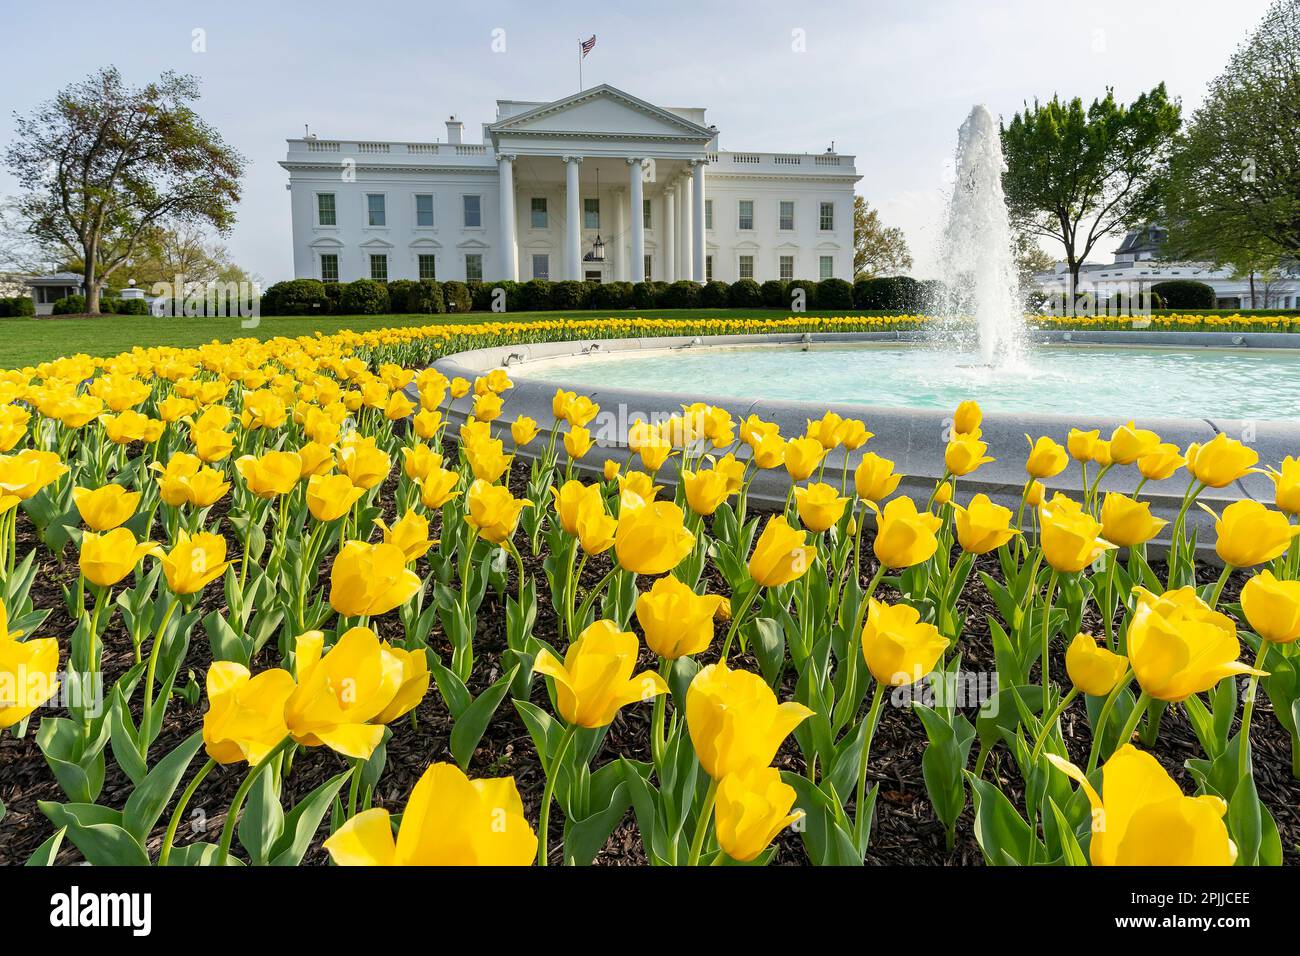 Yellow tulips bloom Thursday, April 8, 2021, on the North Lawn of the White House. (Official White House Photo by Carlos Fyfe) Stock Photo